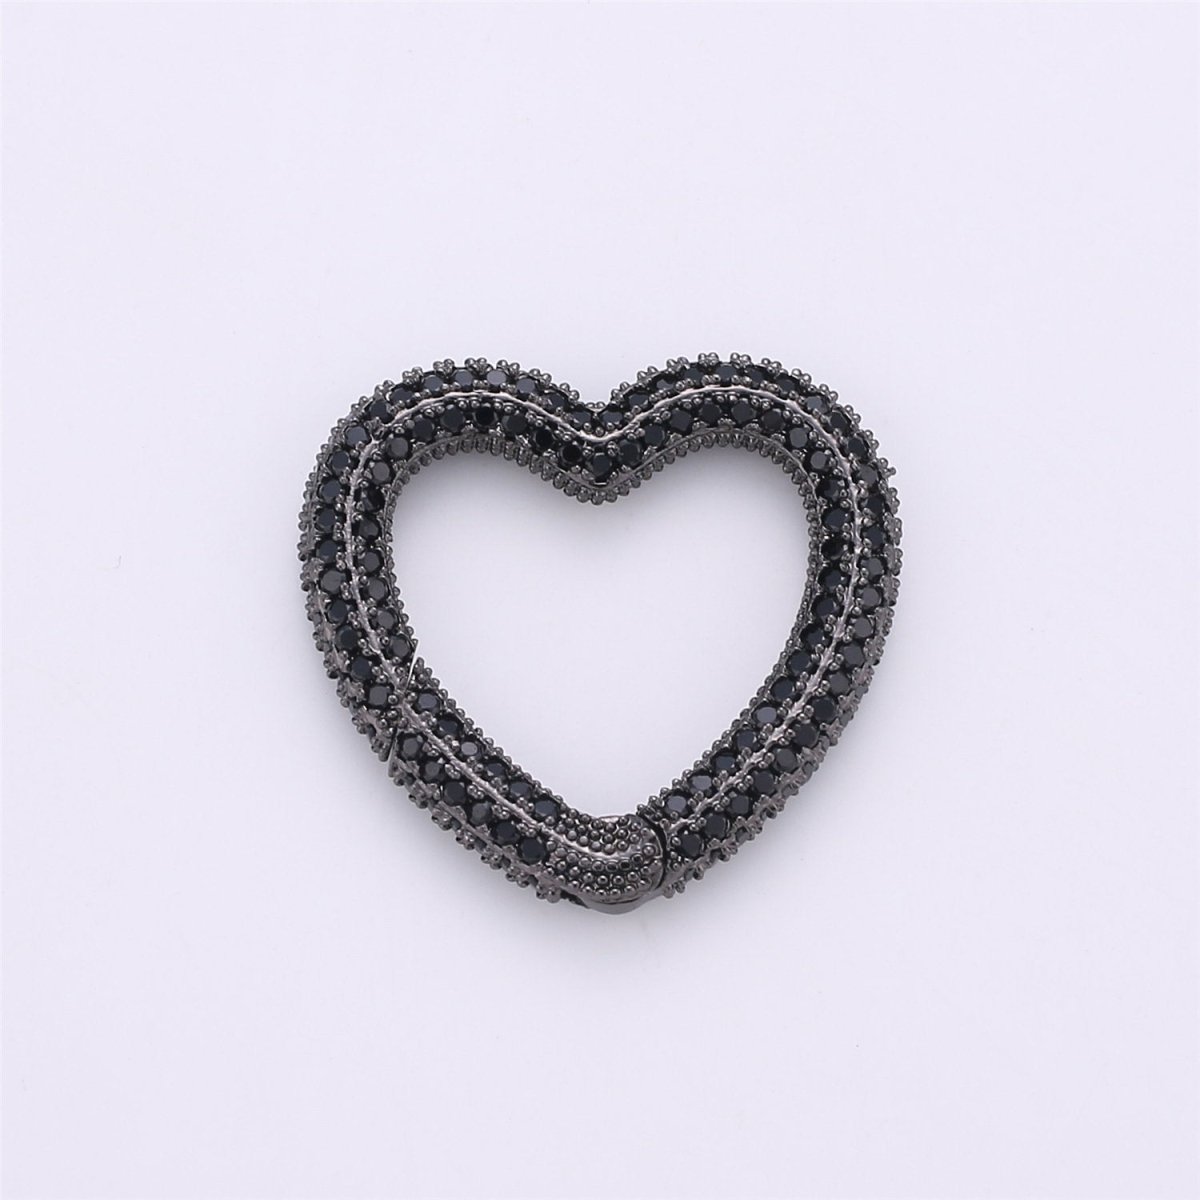 Micro Pave Diamond Heart w/ Screw Mechanism Clasp, Gold Silver Black Rose Gold Carabiner Snap Lock Supply for heavier chain connector L-256 L-257 K-366 - K-368 - DLUXCA